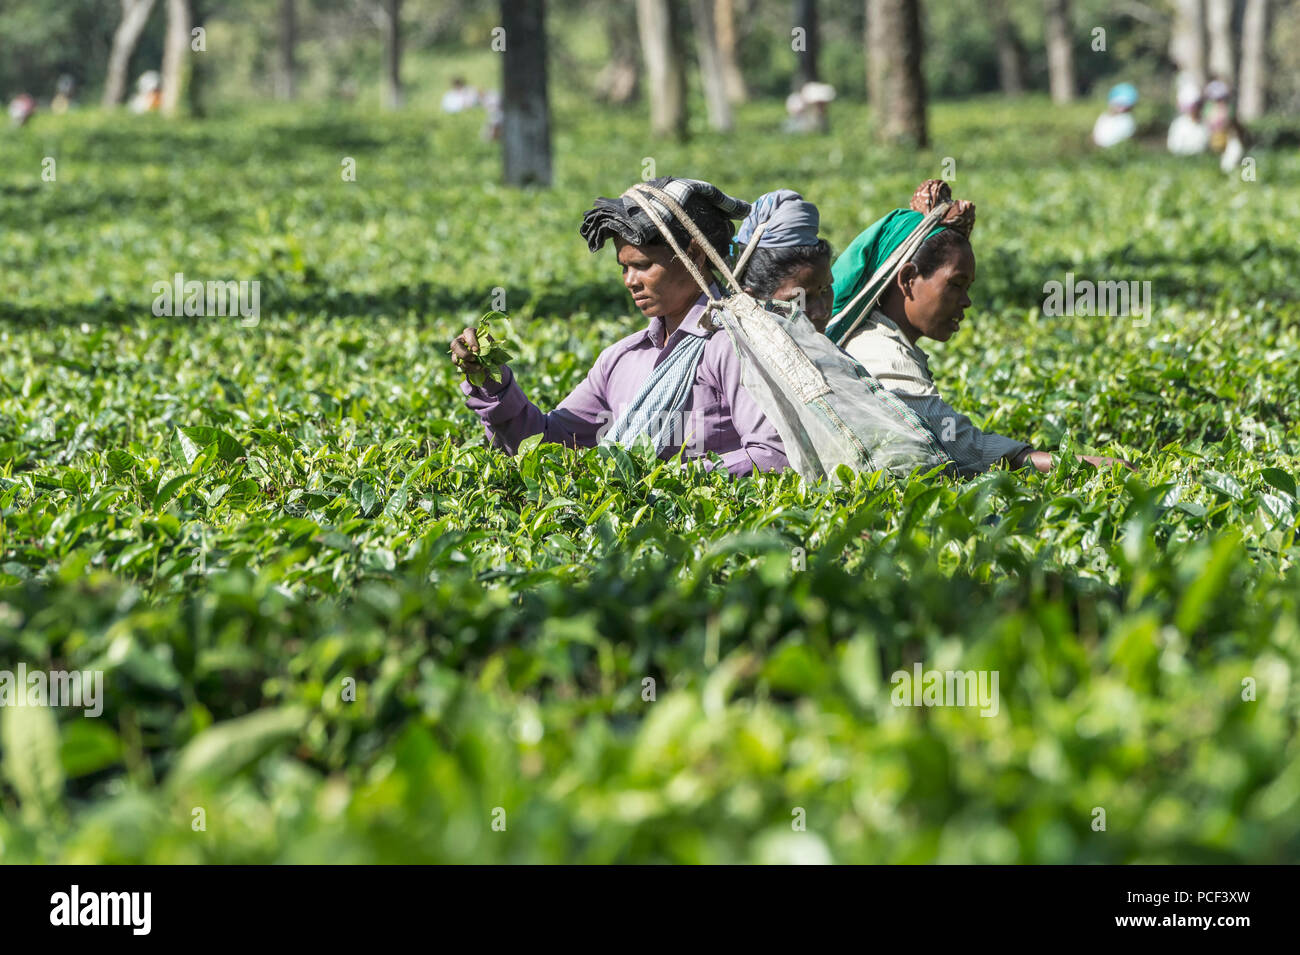 Indian women picking tea leaves, For editorial Use only, Assam, India Stock Photo